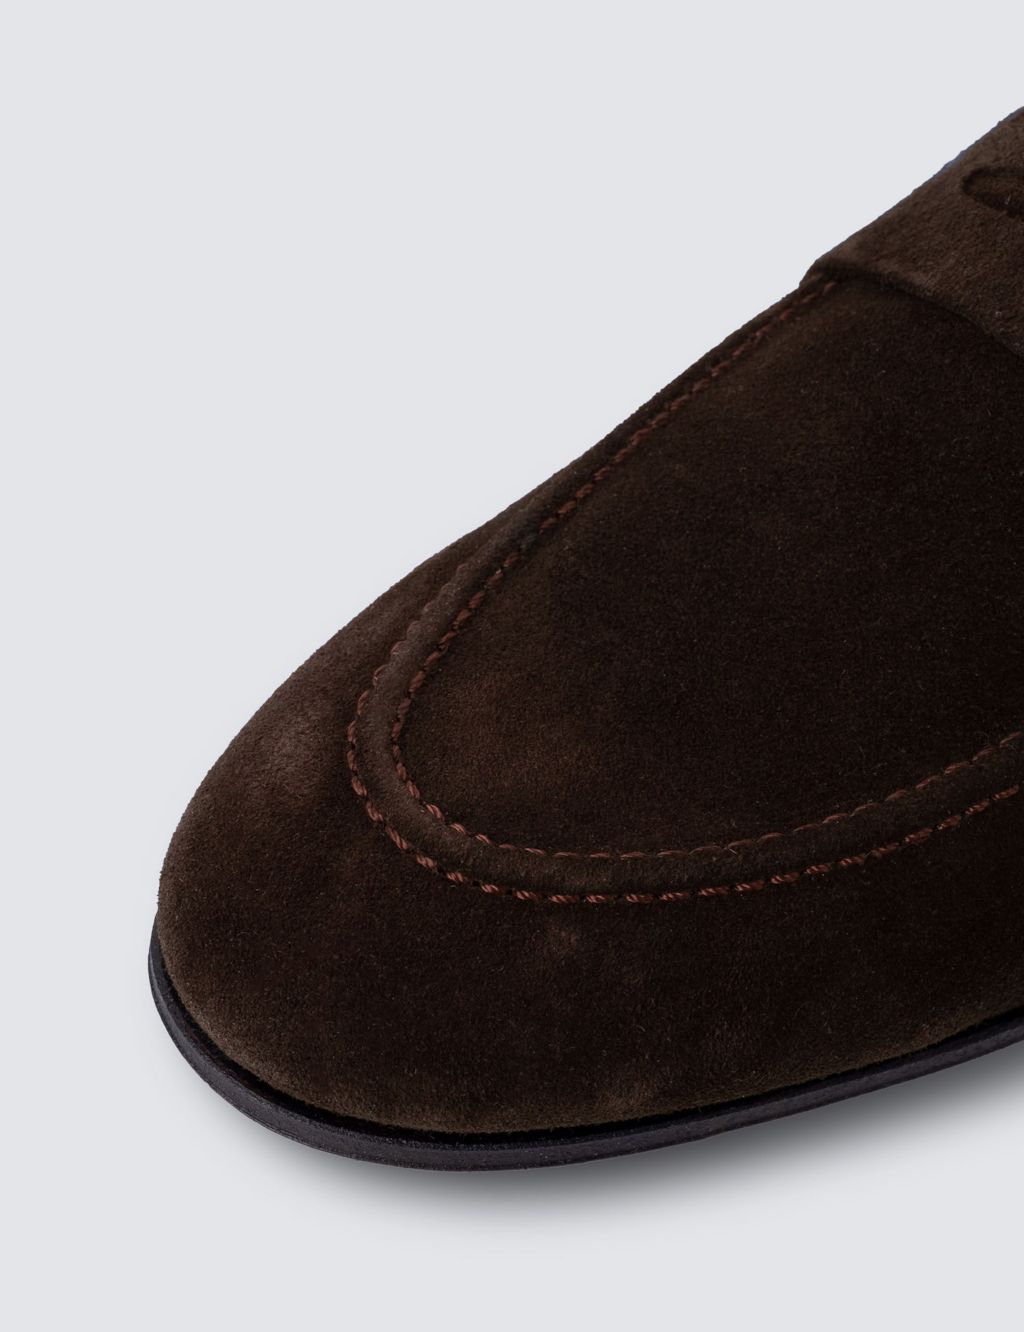 Suede Slip-On Loafers image 6